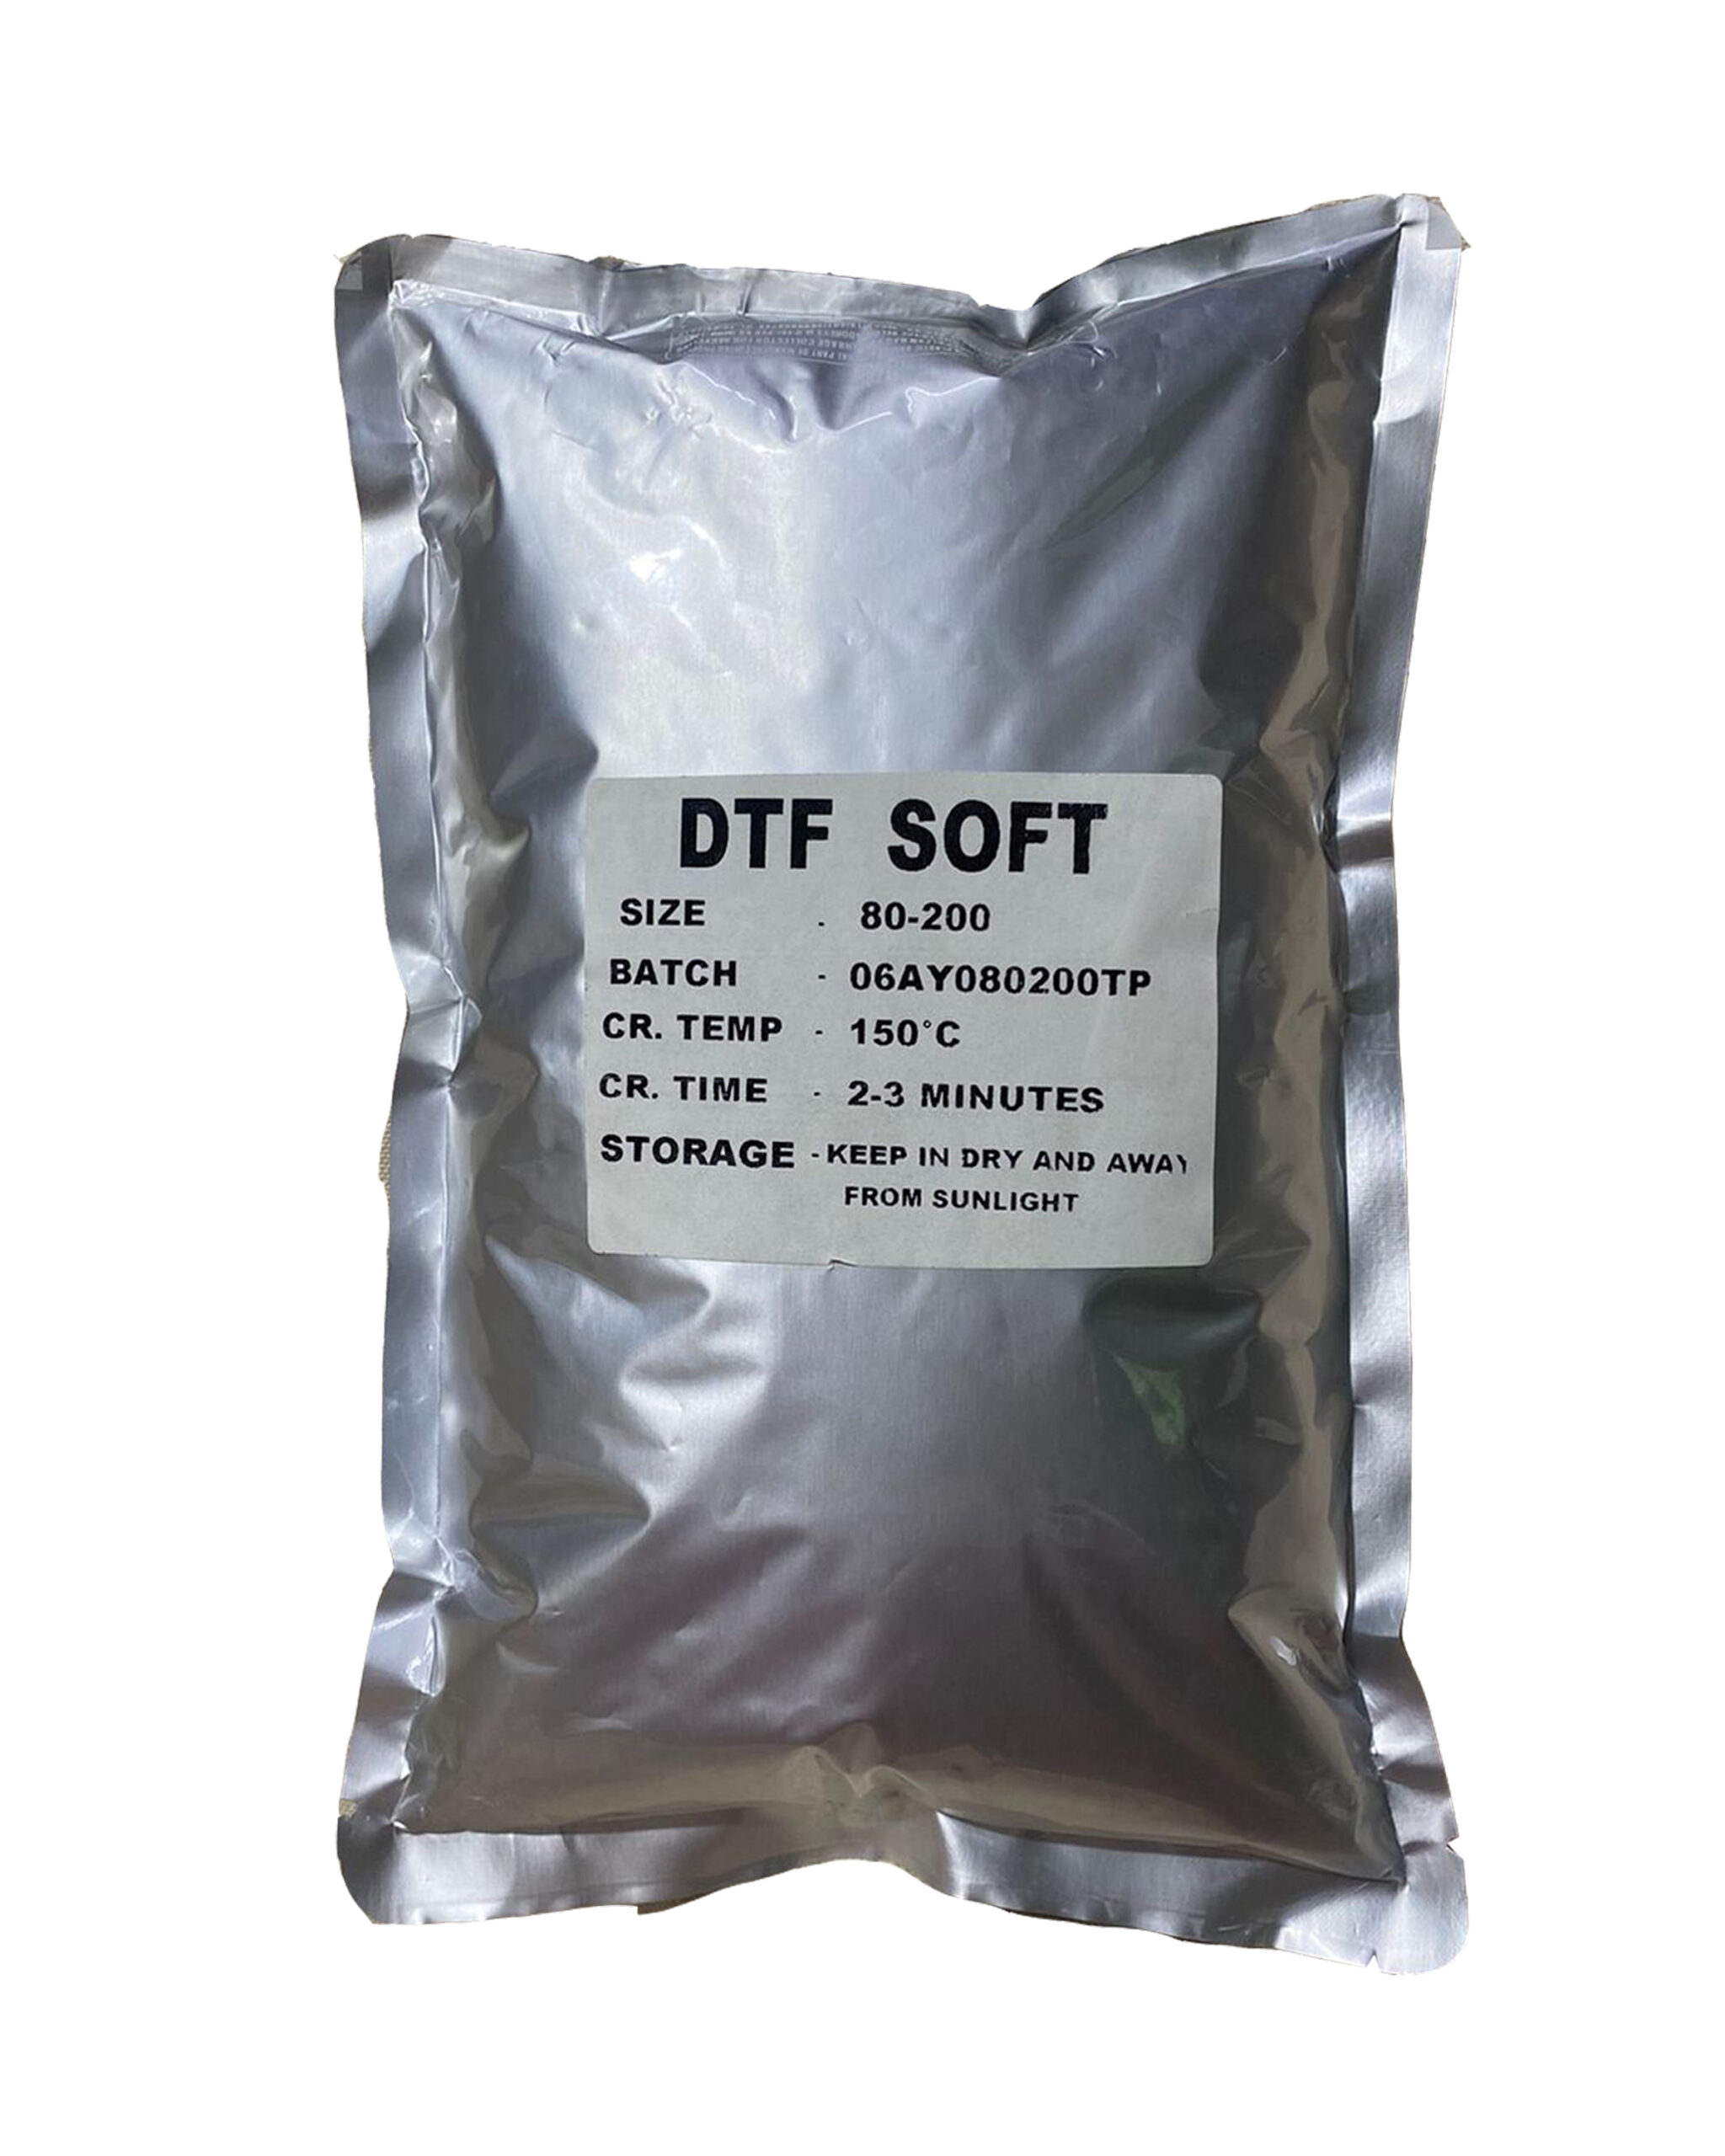 DTF Powder 01 scaled 1 IMPRINT SOLUTION We Imprint Solution Dealing With Printers, Inks, Papers https://imprintsolution.co.in/wp-content/uploads/2021/02/cropped-Imprint-logo-01-1.png ₹3499